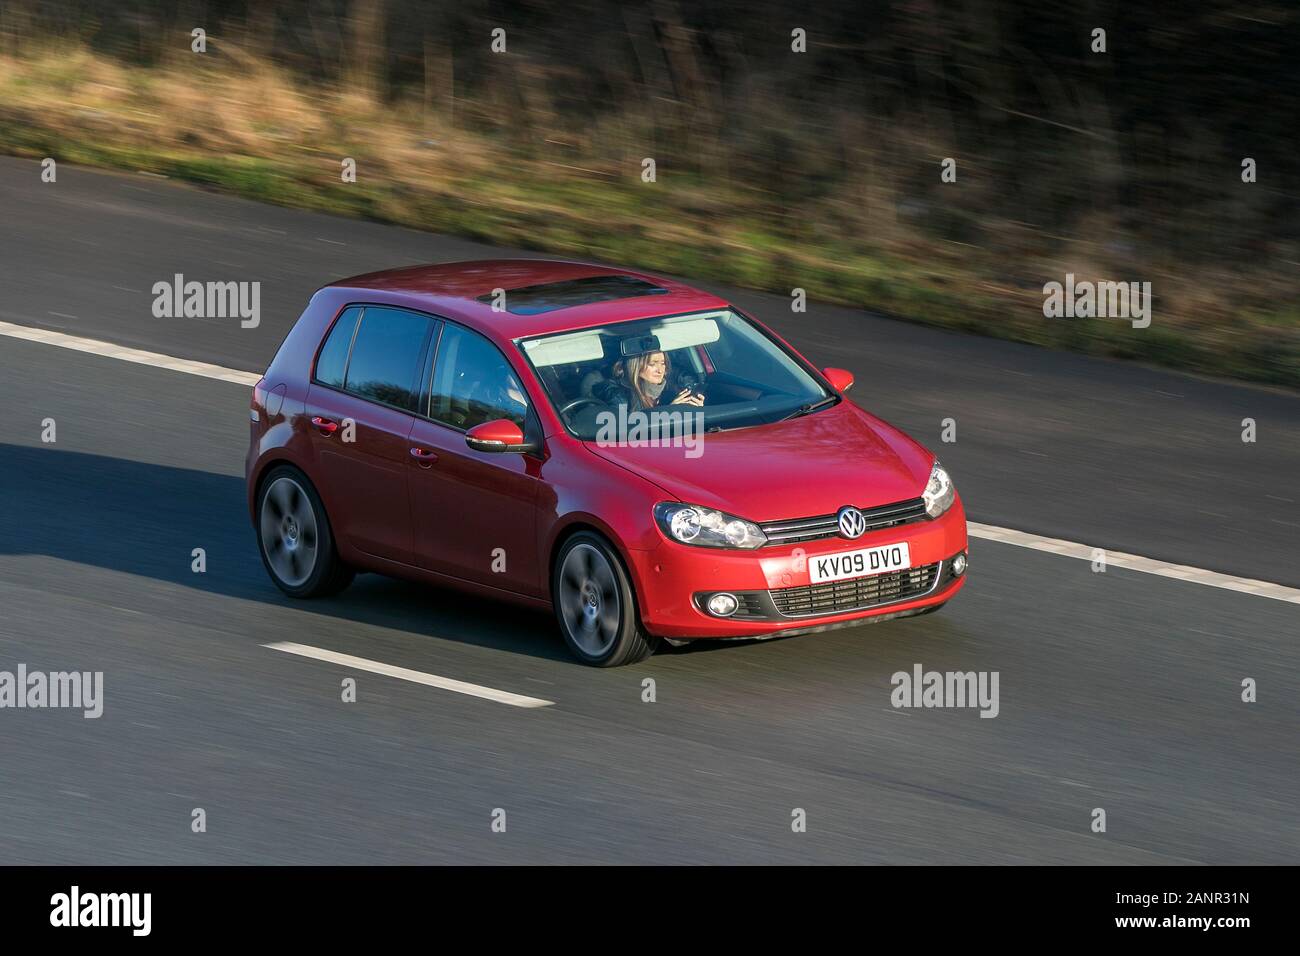 Vw Volkswagen Golf Gt High Resolution Stock Photography and Images - Alamy